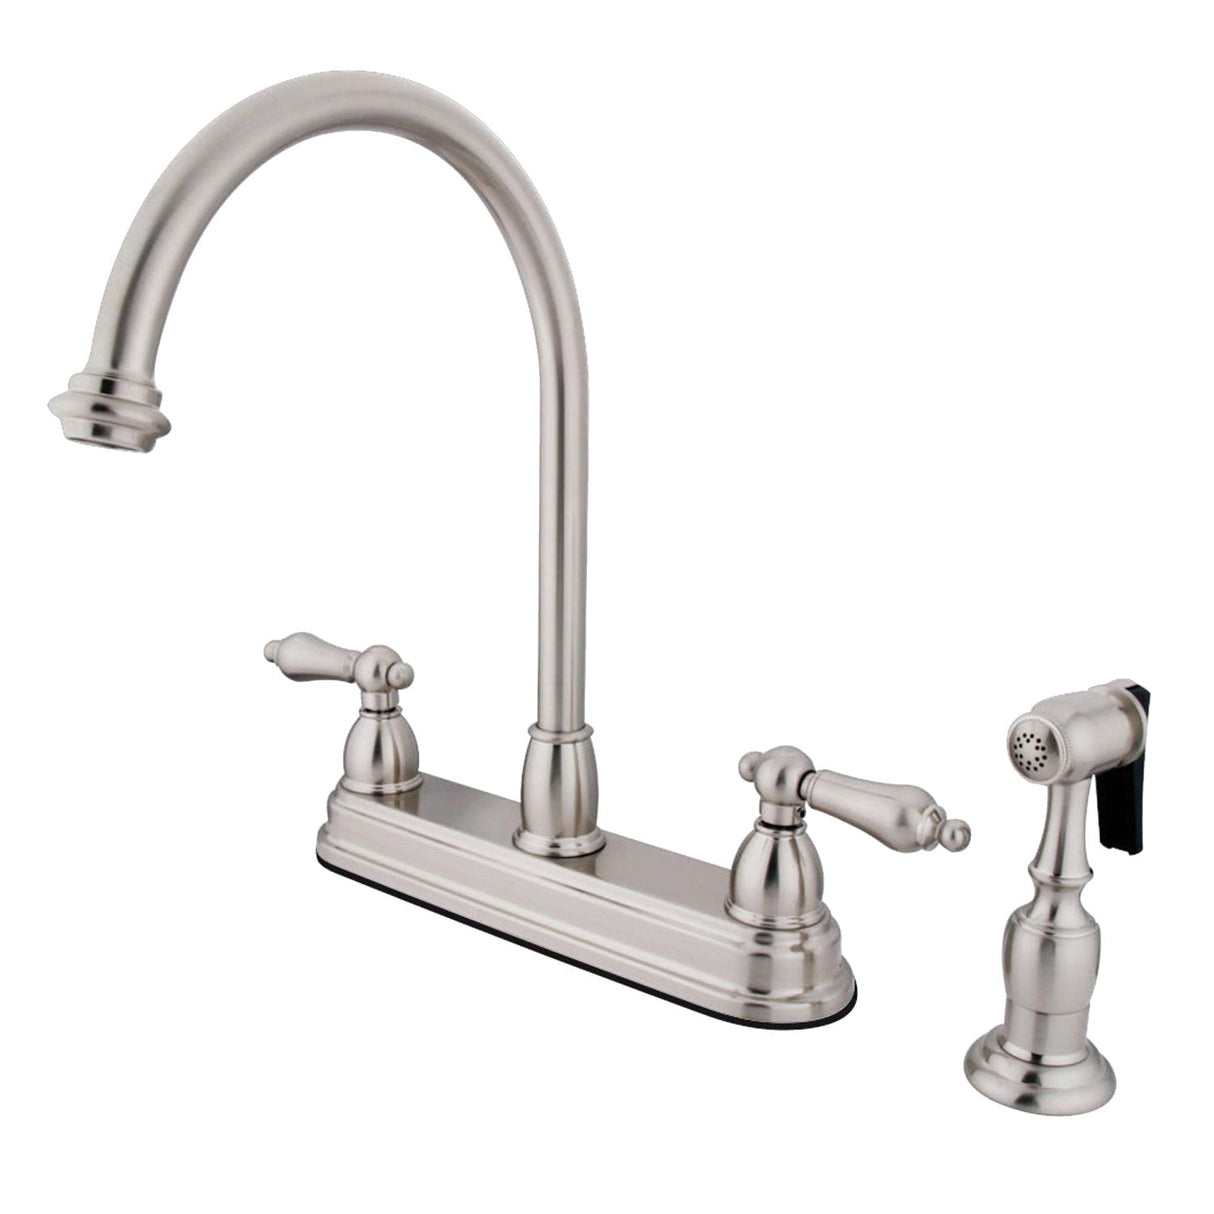 Restoration KB3758ALBS Two-Handle 4-Hole Deck Mount 8" Centerset Kitchen Faucet with Side Sprayer, Brushed Nickel